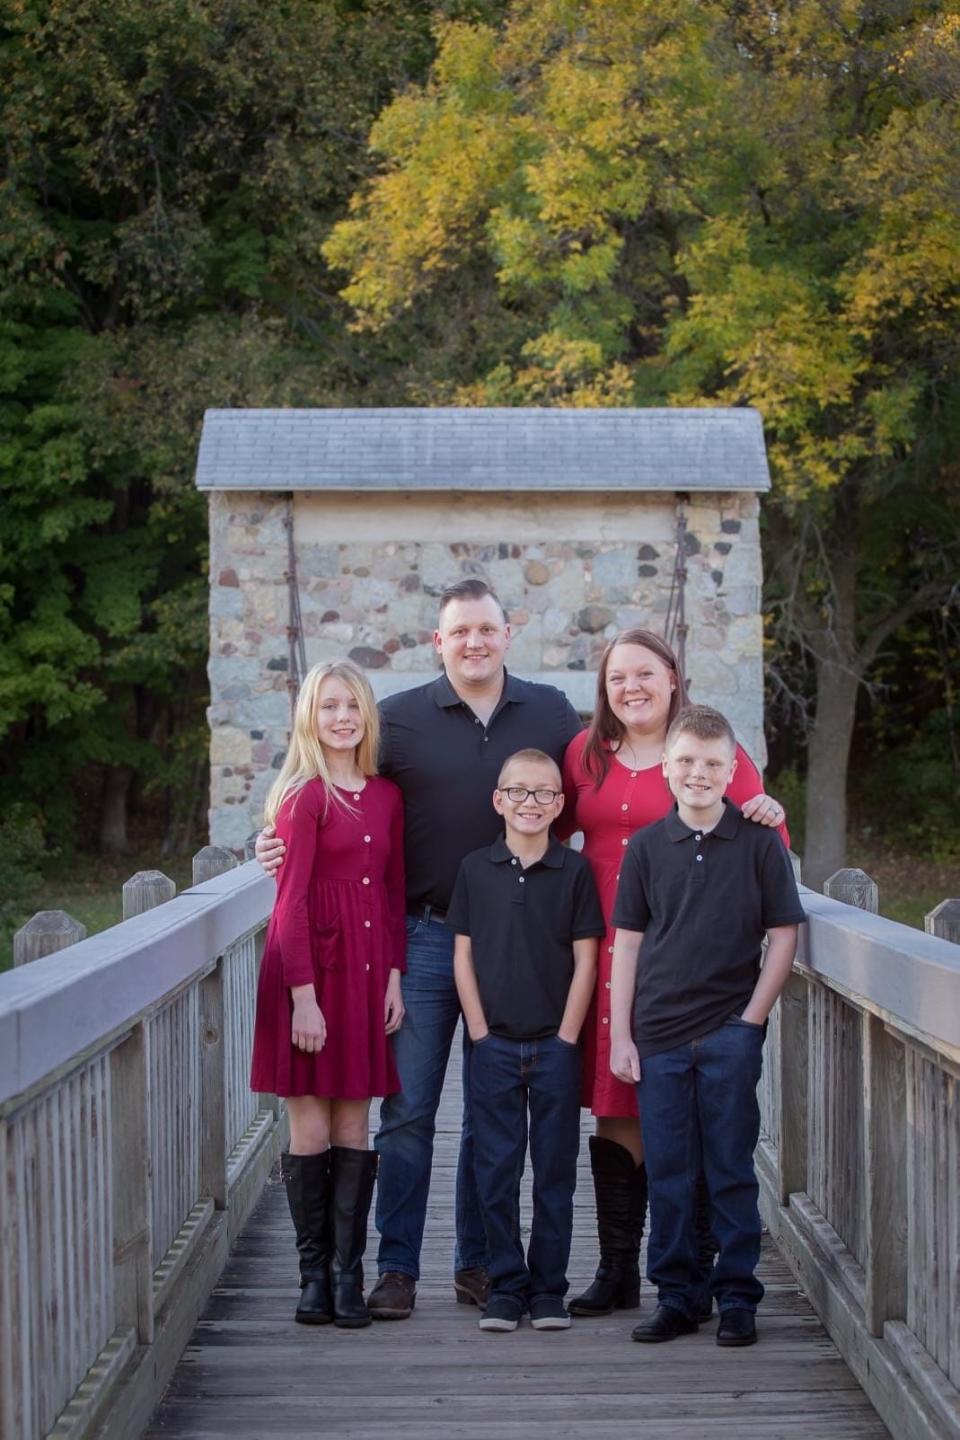 From left to right: Charlotte Passamoni, 13, Shane Passamoni, 34, Alec Passamoni, 12, Jessica Passamoni, 32, and Coltyn Feld, 13. The Passamonis adopted Charlotte and Alec in September 2022 after fostering them more than two years.